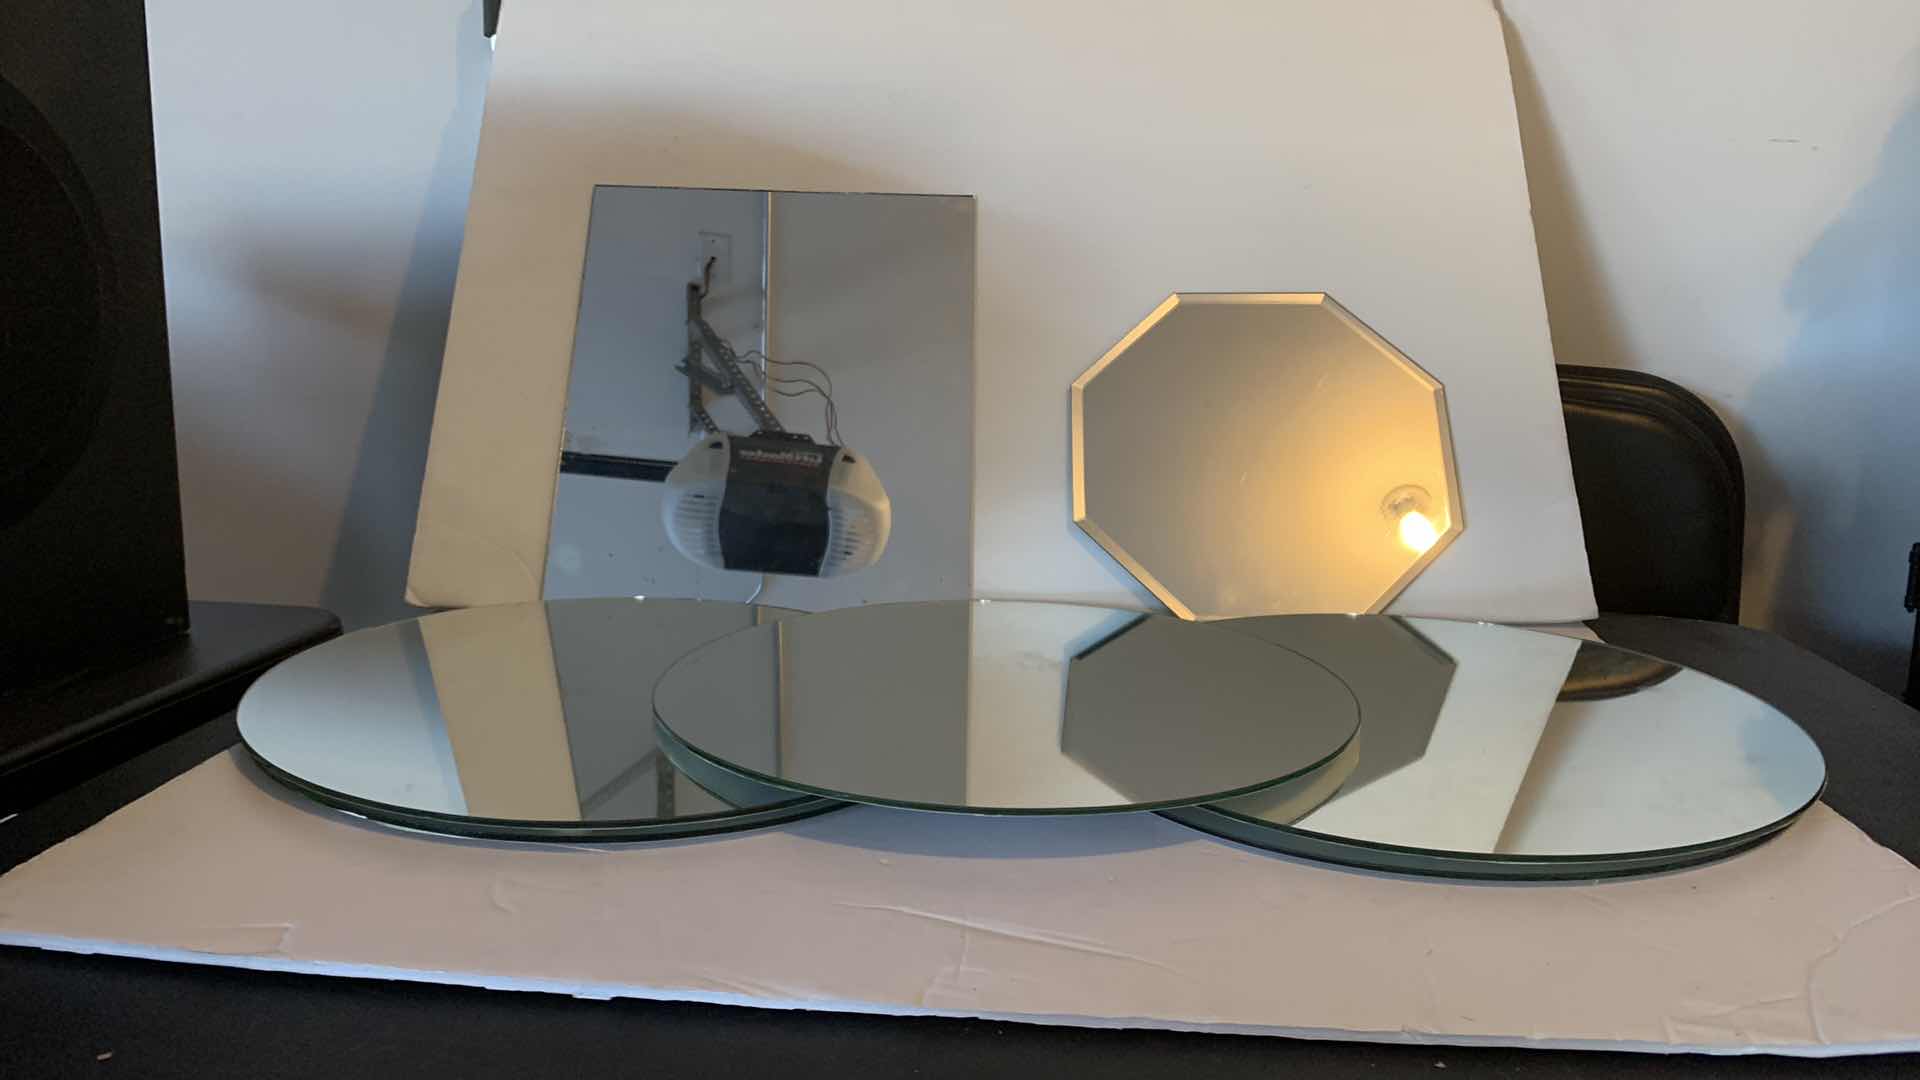 Photo 3 of 7 DISPLAY MIRRORS FOR CENTERPIECES ( 5 ROUND, 1 SQUARE, 1 OCTAGON) 
ROUND 14”